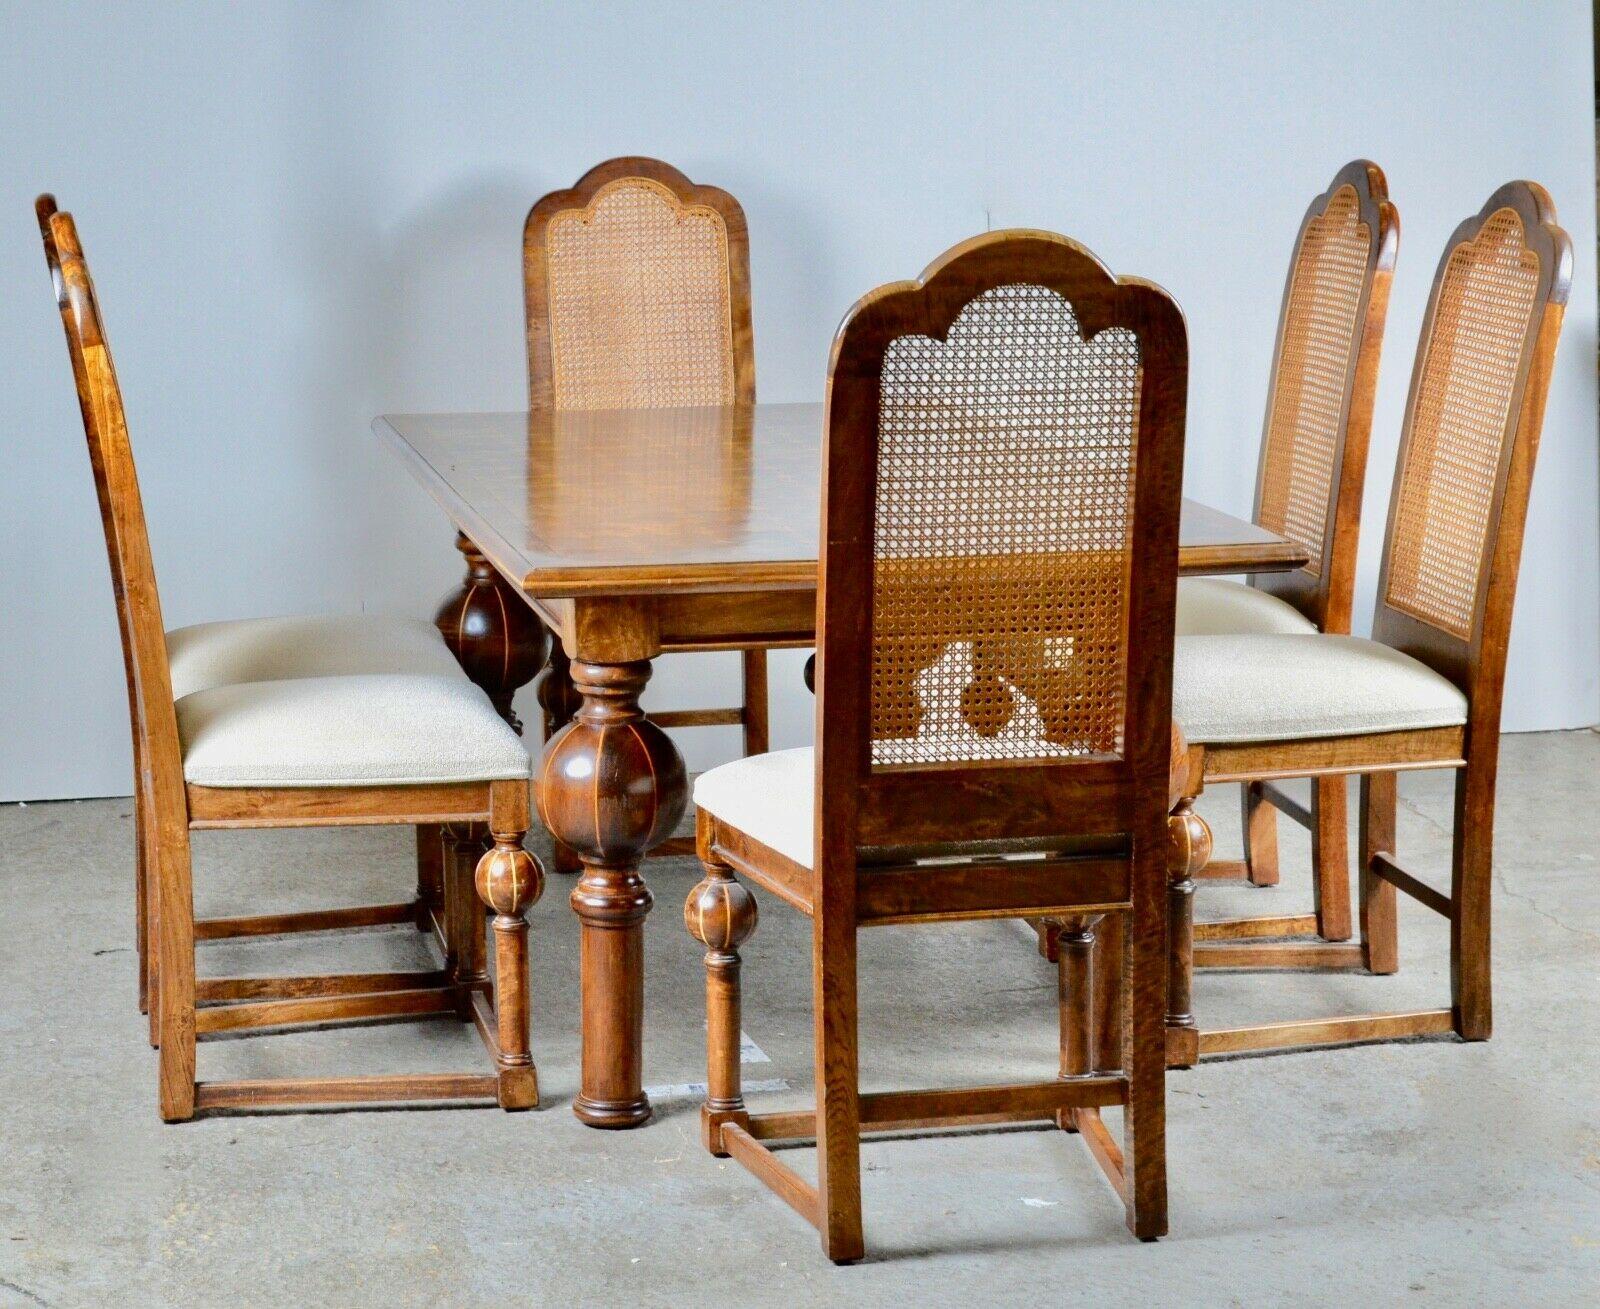 We are delighted to offer for sale this quality country farmhouse dining table and suite of six chairs. The table is made of solid hardwood with walnut parquetry inlay and the chairs with cane backs. The condition is as good as it looks, we have